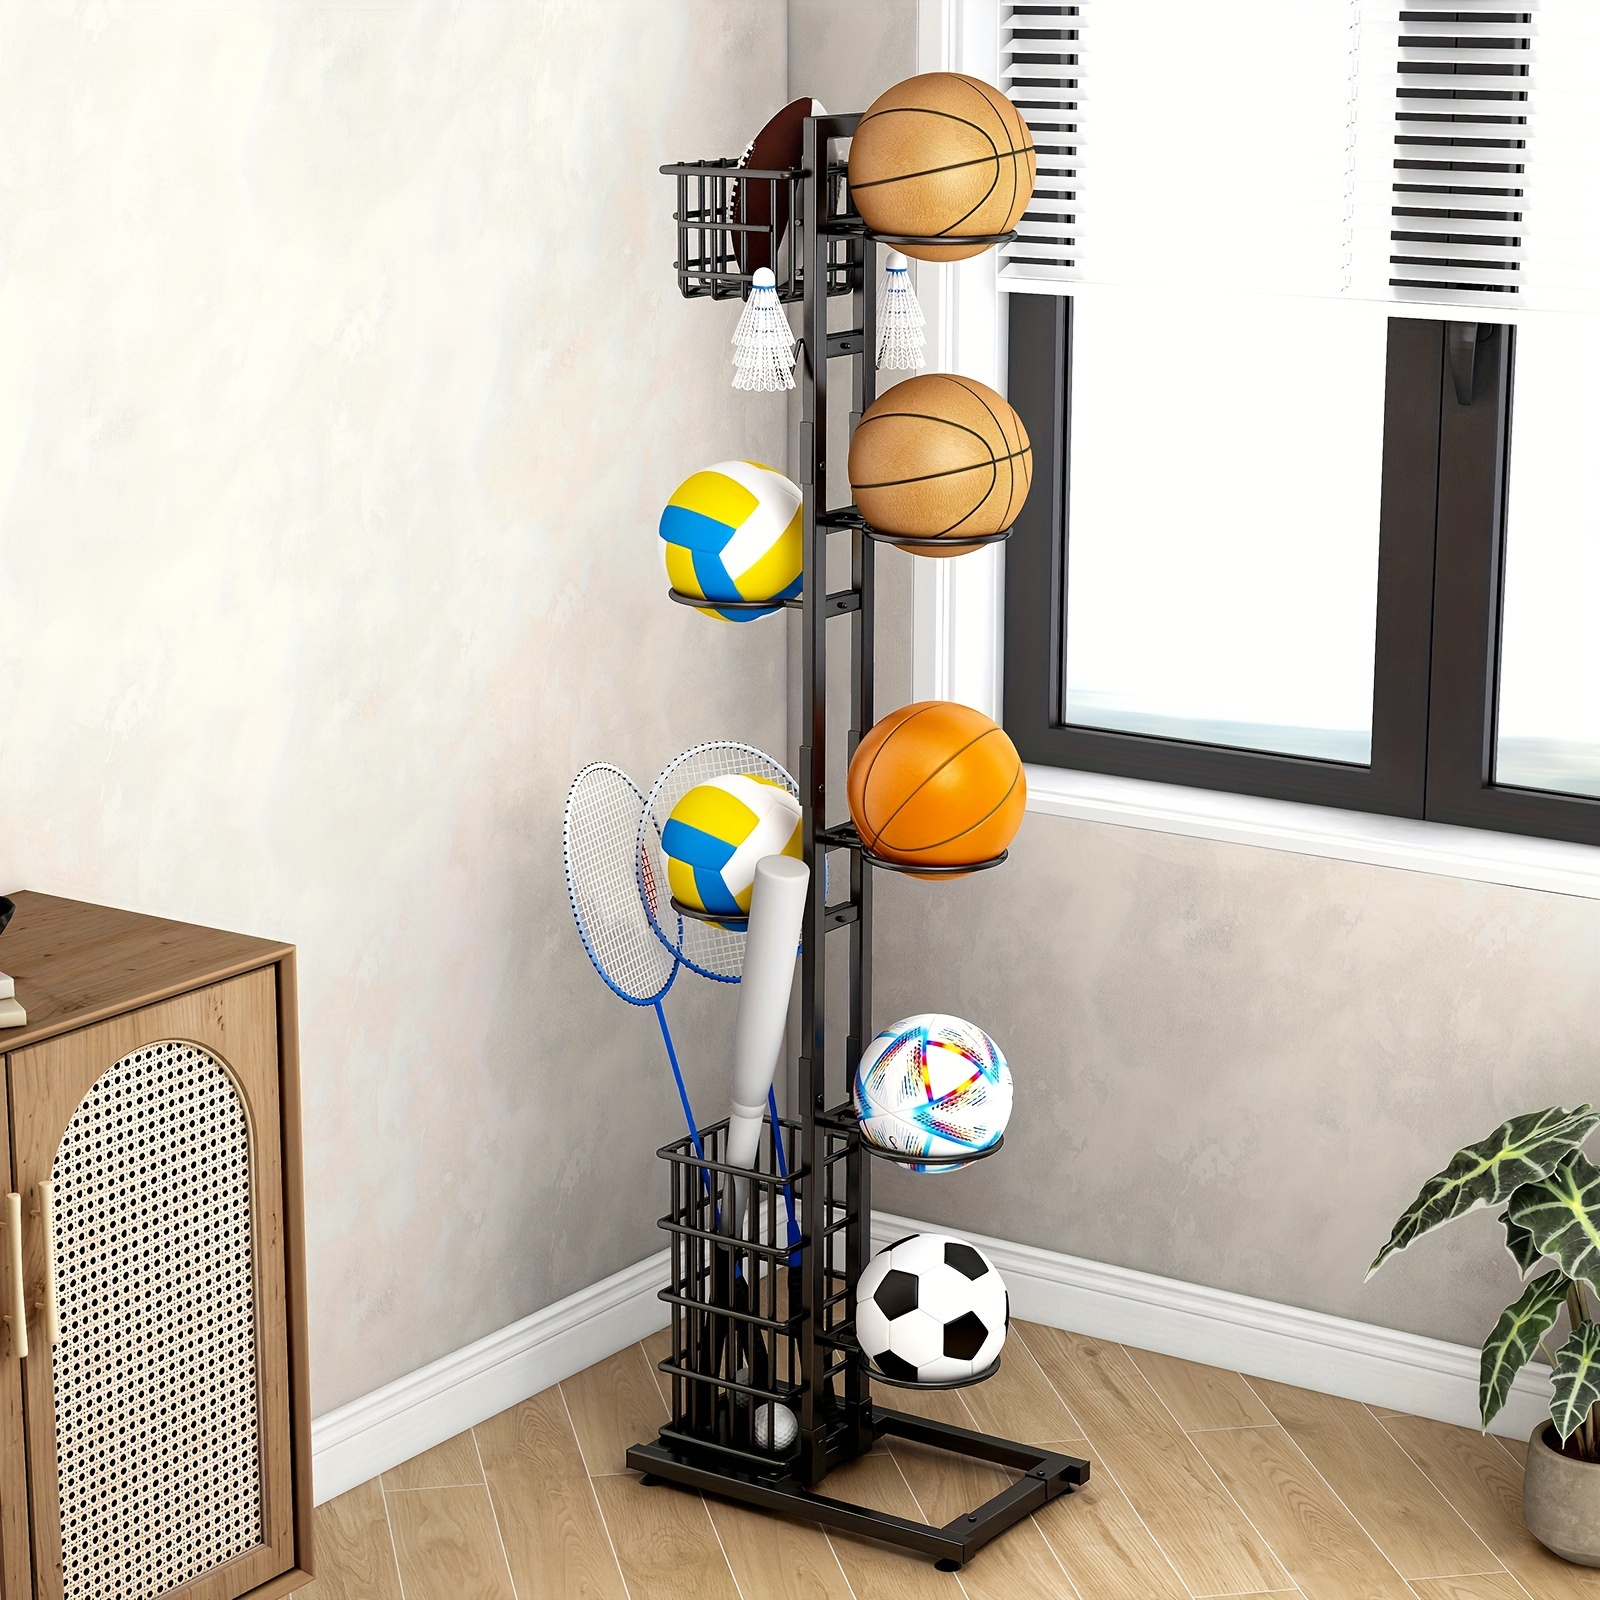 

1pc, Metal Vertical Ball Rack With Plastic Base, Sporting Goods Organizer For Basketball, Football, Rugby, Badminton Racket & Volleyball, Multi-level Storage Basket, Durable Display Stand